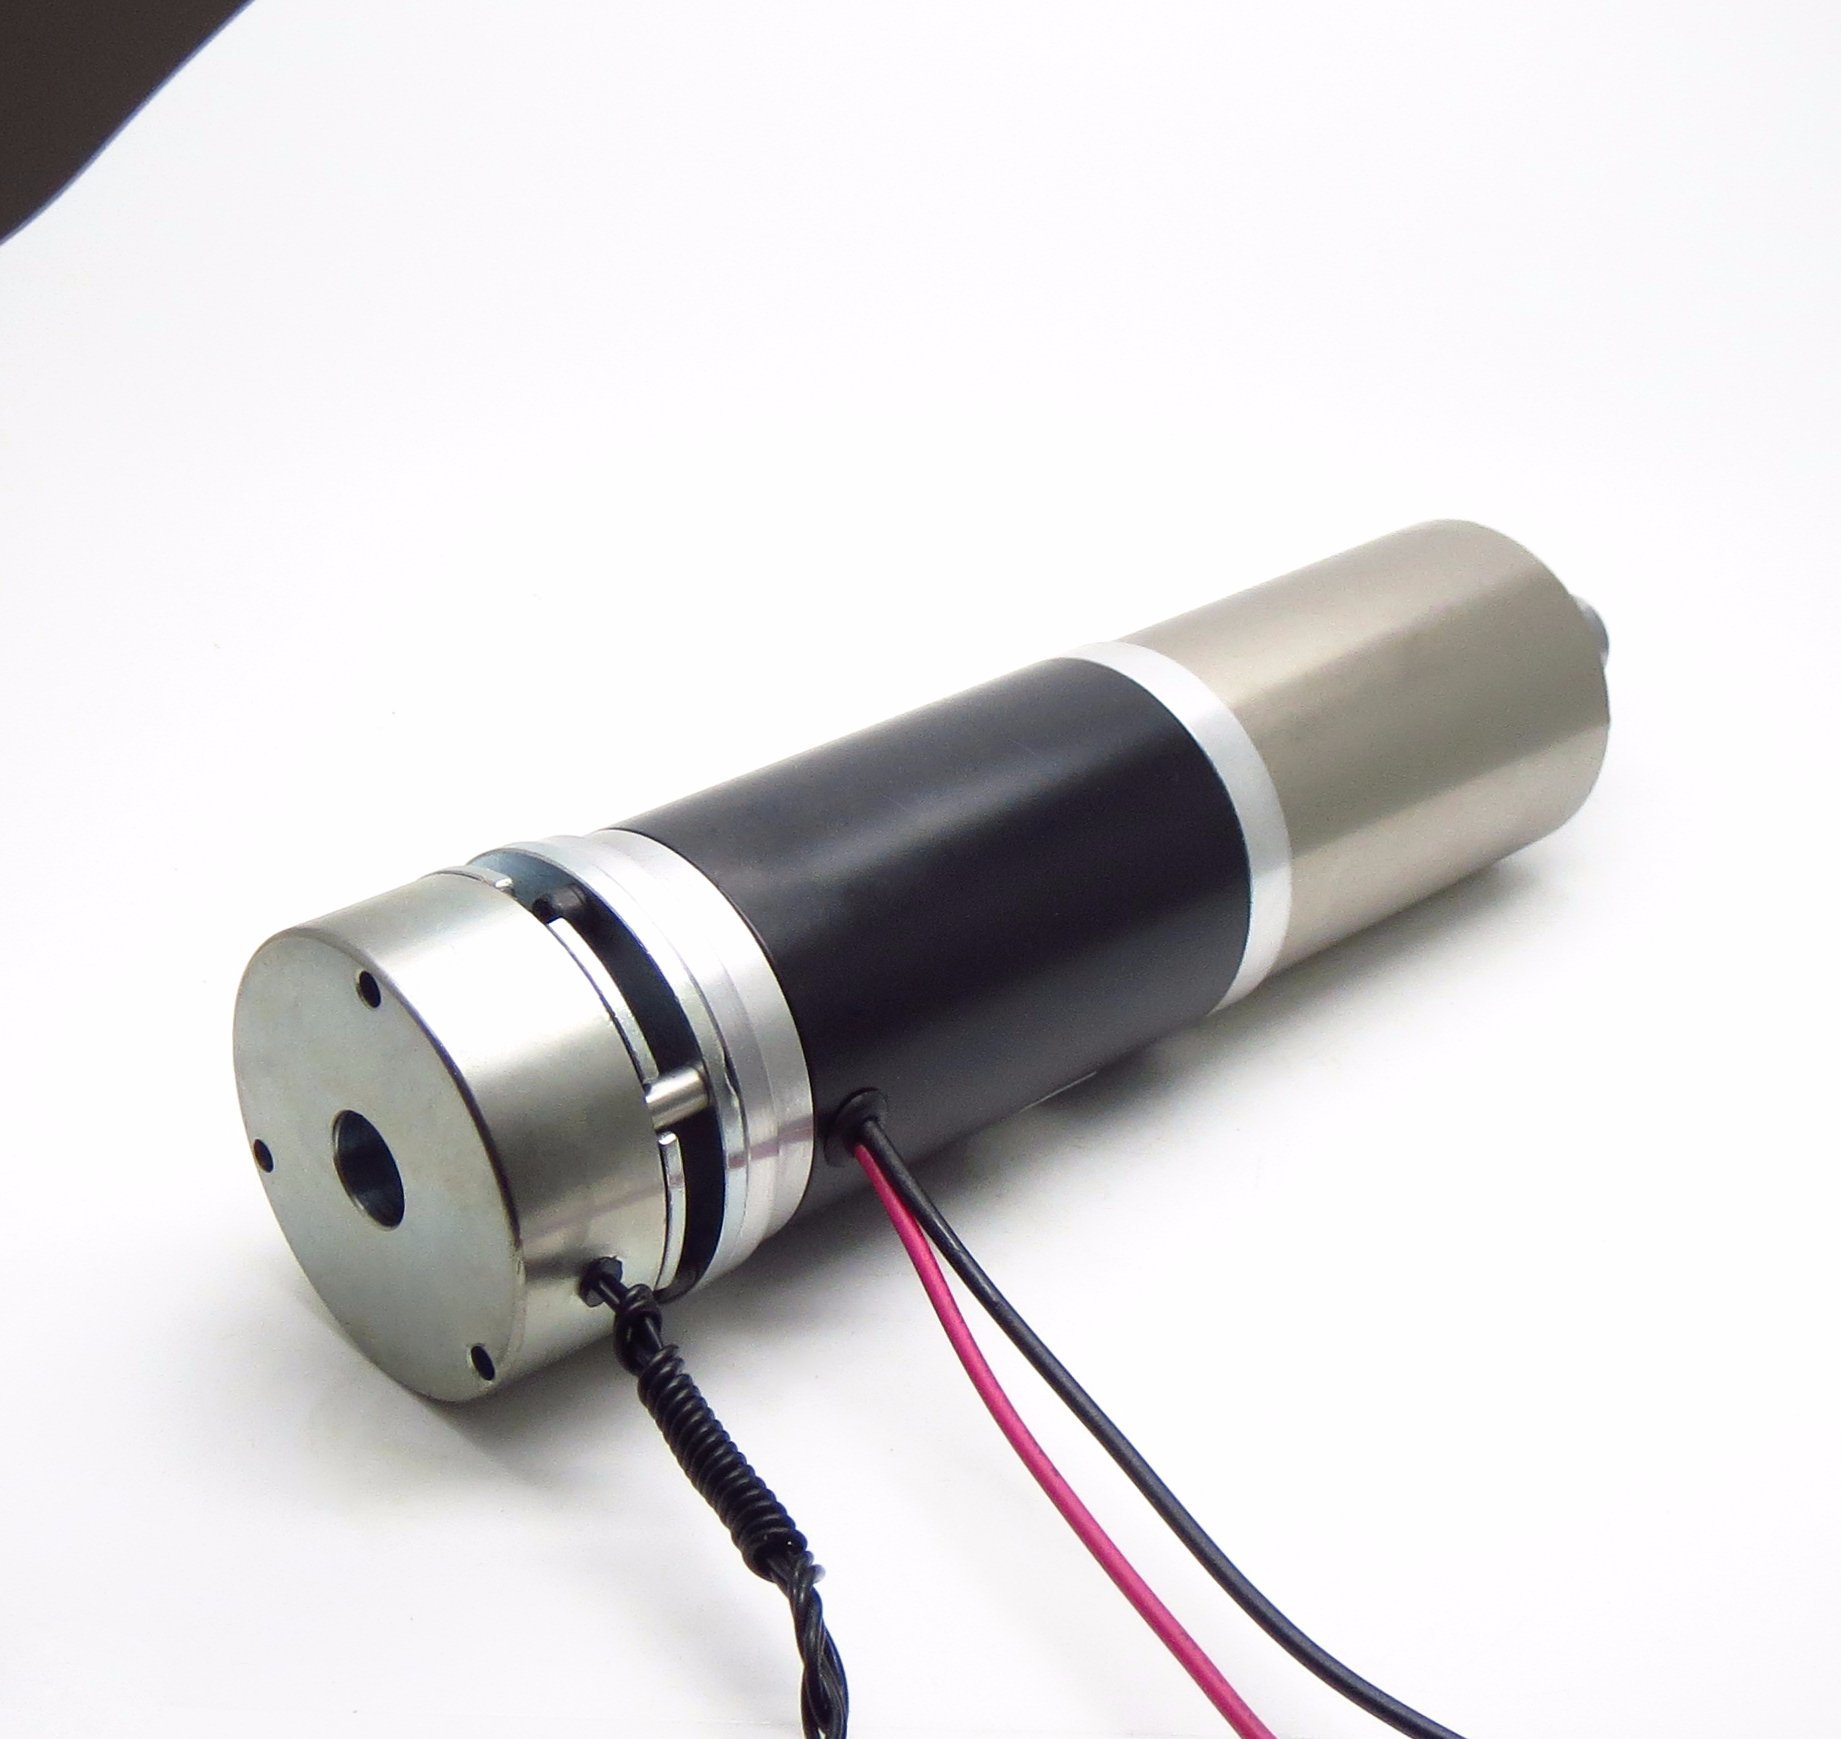 56mm DC Gear Motor with Encoder and Brake